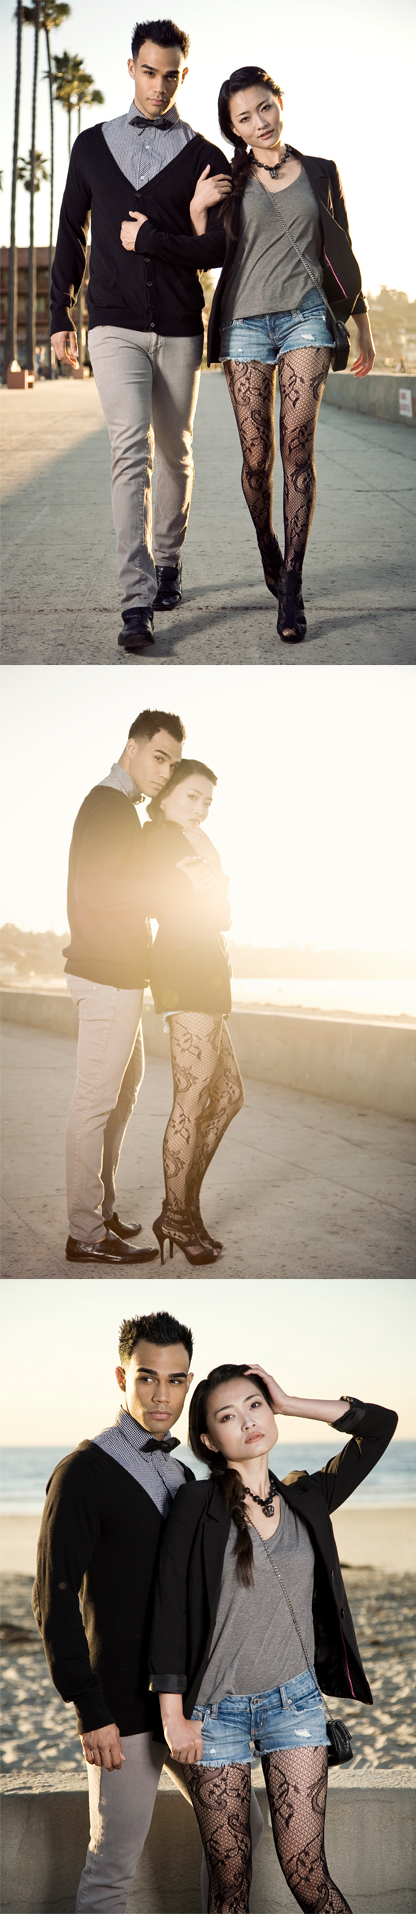 Male and Female model photo shoot of somnang, Robby zumaya and Yuki Matsumura in la jolla, ca, hair styled by Gwendolyn Sneed, wardrobe styled by Chesley Carele Stylist, makeup by KC Witkamp